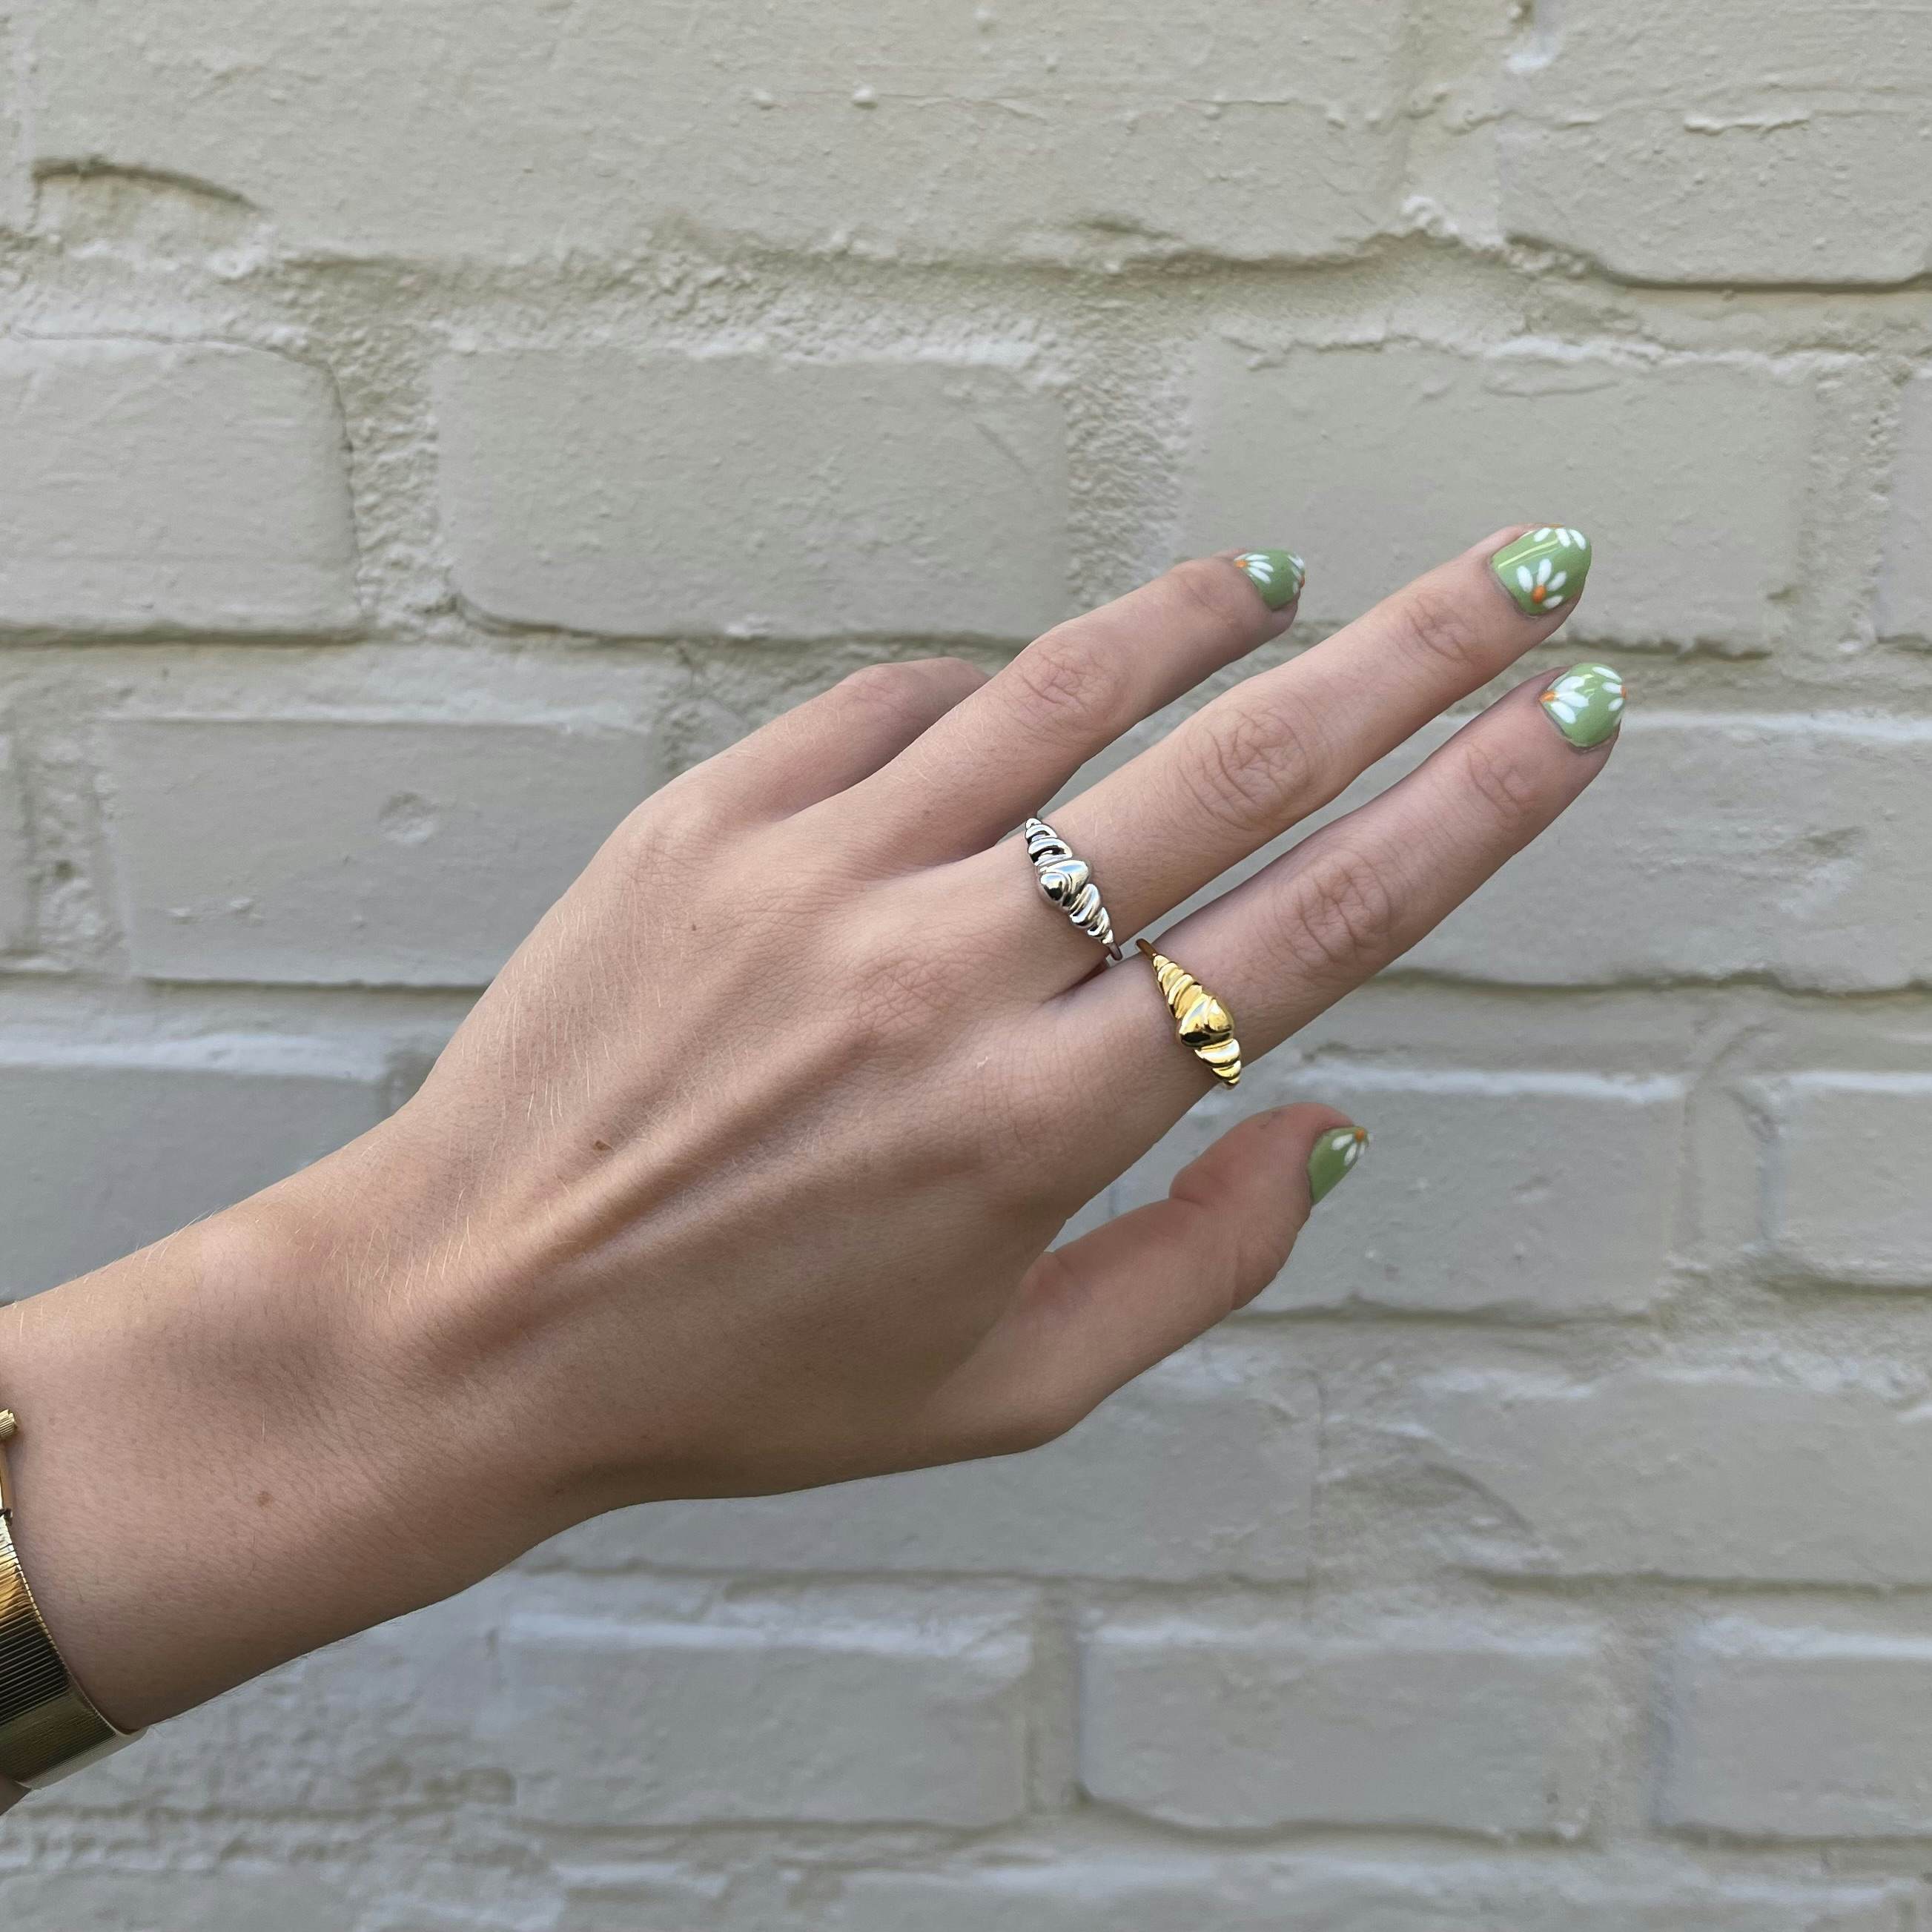 Frederikke Wærens by Sistie Croissant Ring from Sistie in Goldplated-Silver Sterling 925